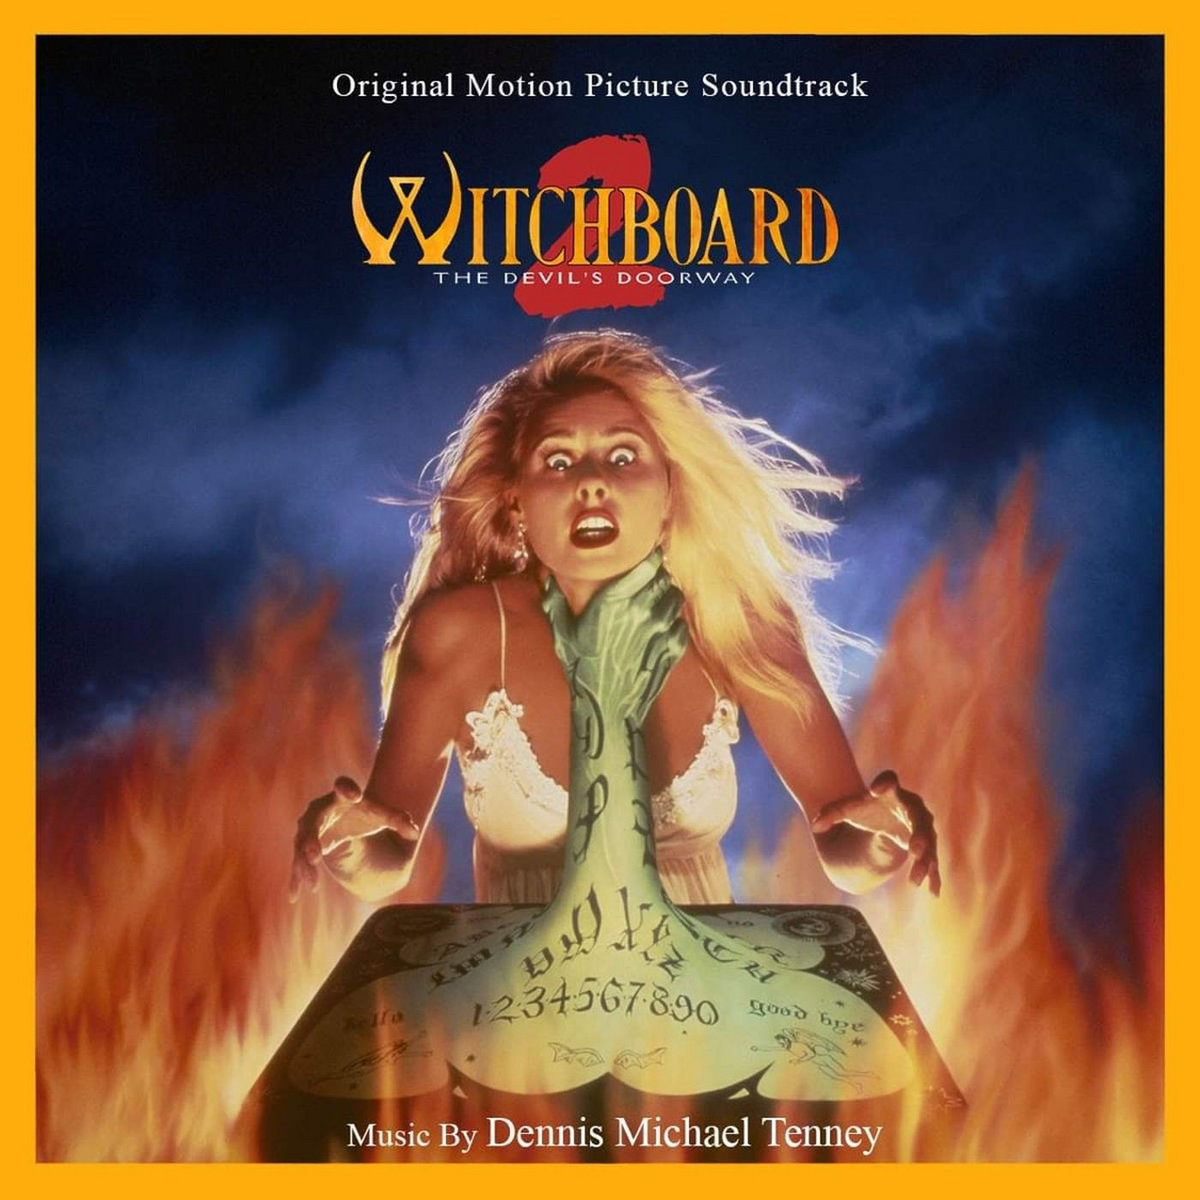 20) Paul and J sourced sounds from composer Dennis Michael Tenney’s work on the effective but lesser known score for 1993’s 'Witchboard 2: The Devil's Doorway.'  https://dennismichaeltenney.bandcamp.com/album/witchboard-2-the-devils-doorway-original-motion-picture-soundtrack